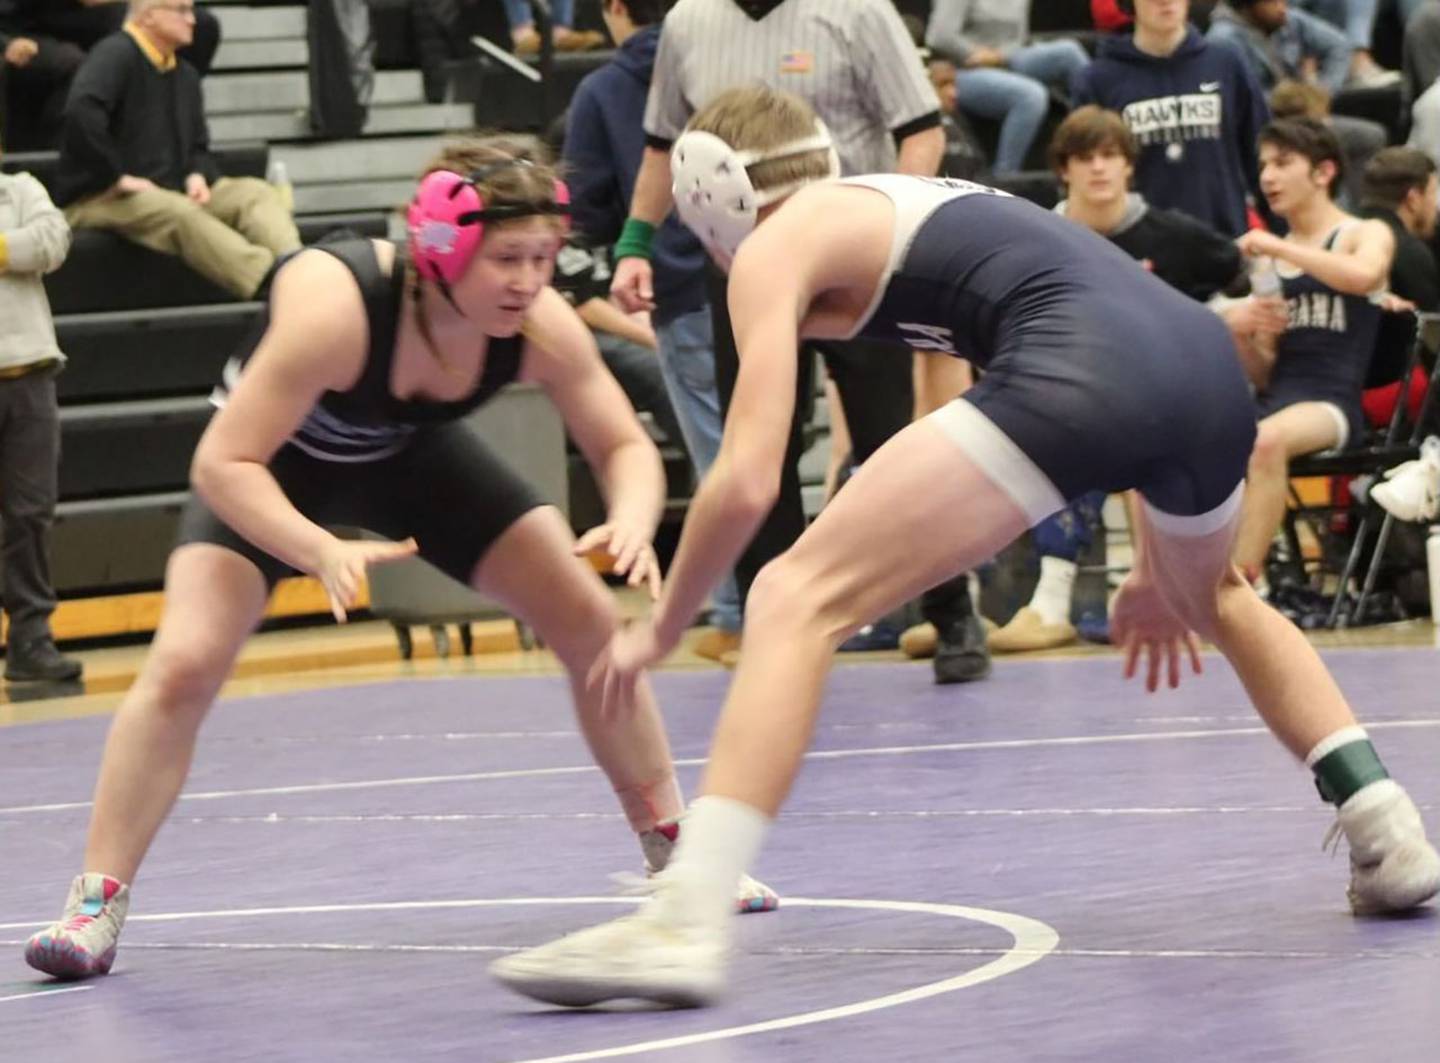 "I've competed against guys since I was little,"said South River's 113-pound senior Alex Szkotnicki (facing), a team captain with a 12-0 record (six pins) in Anne Arundel County and an overall mark of 40-5 (27 pins). Szkotnicki is the No. 1 seed entering the Anne Arundel County Tournament on Feb. 17-18 at Broadneck.